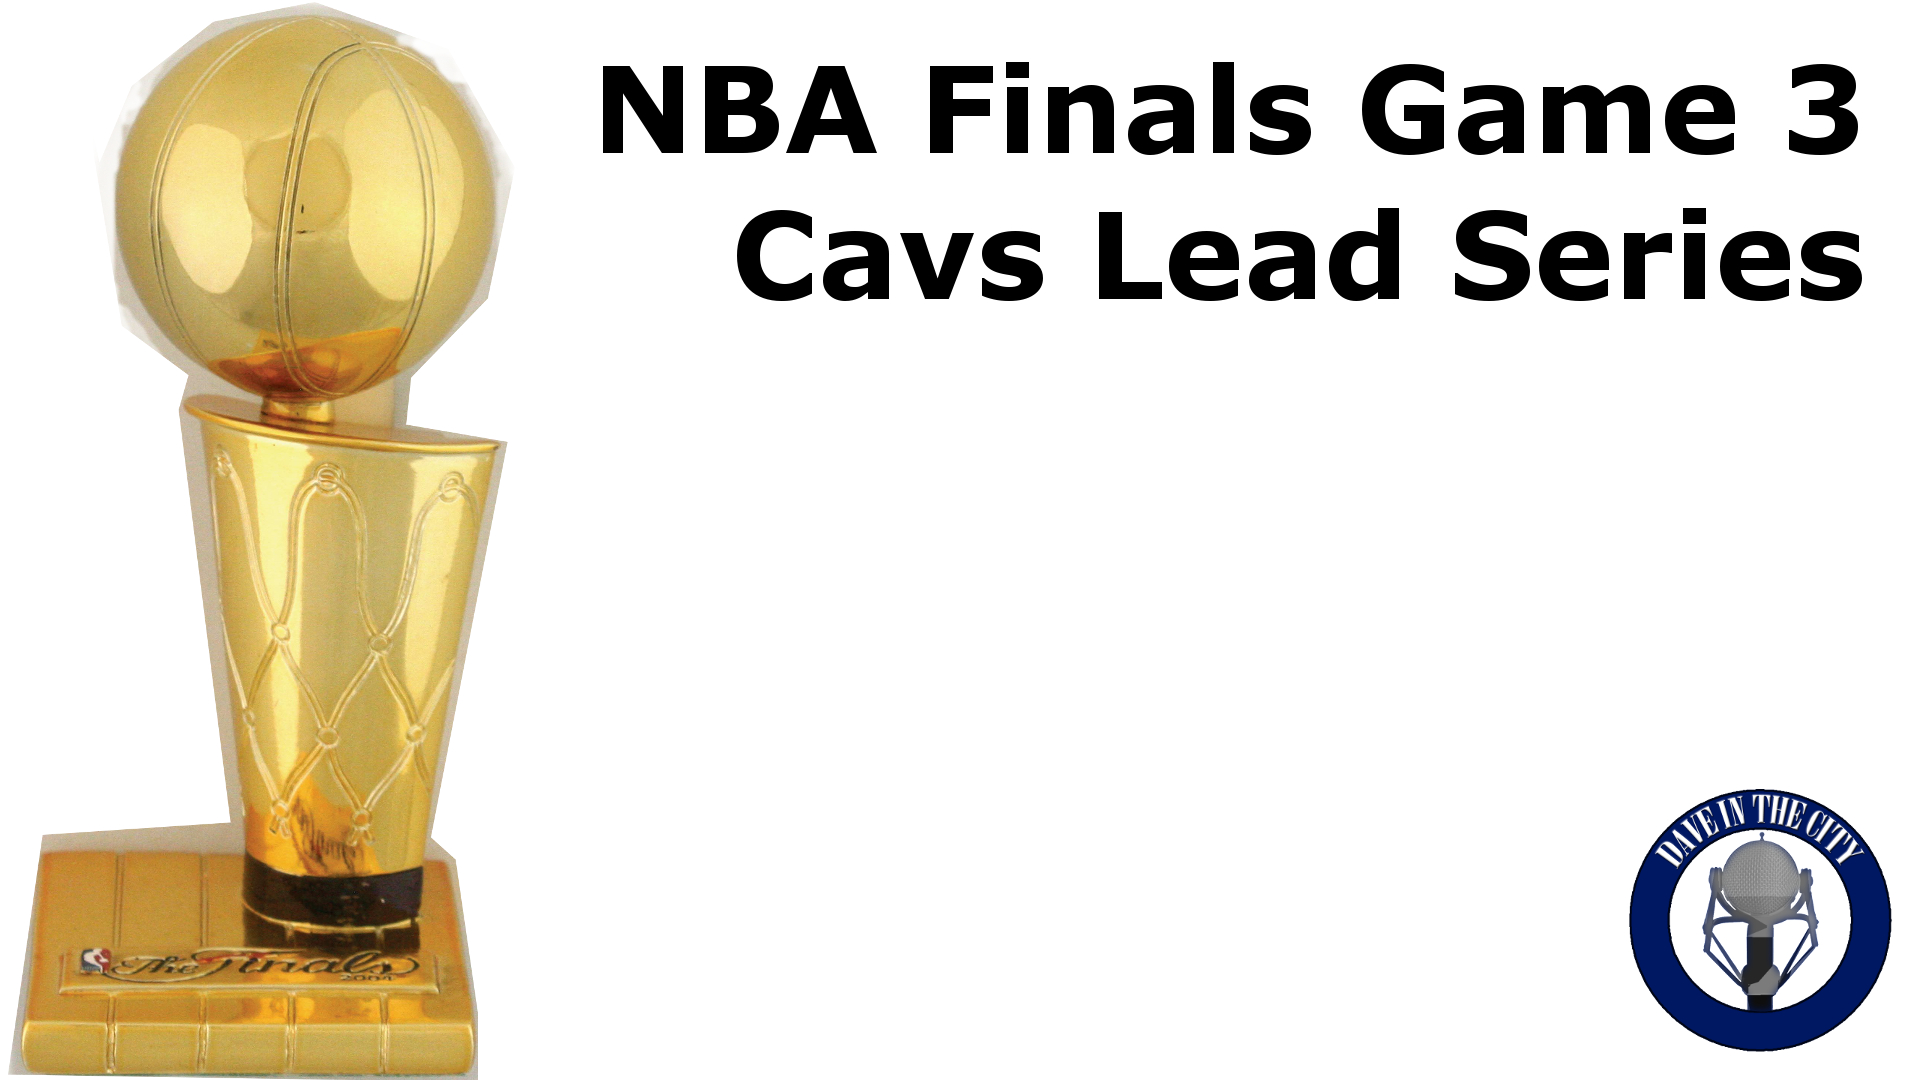 Podcast: Warriors / Cavs NBA Finals Game 3, Lightning Lead Stanley Cup Final (06-10-15)